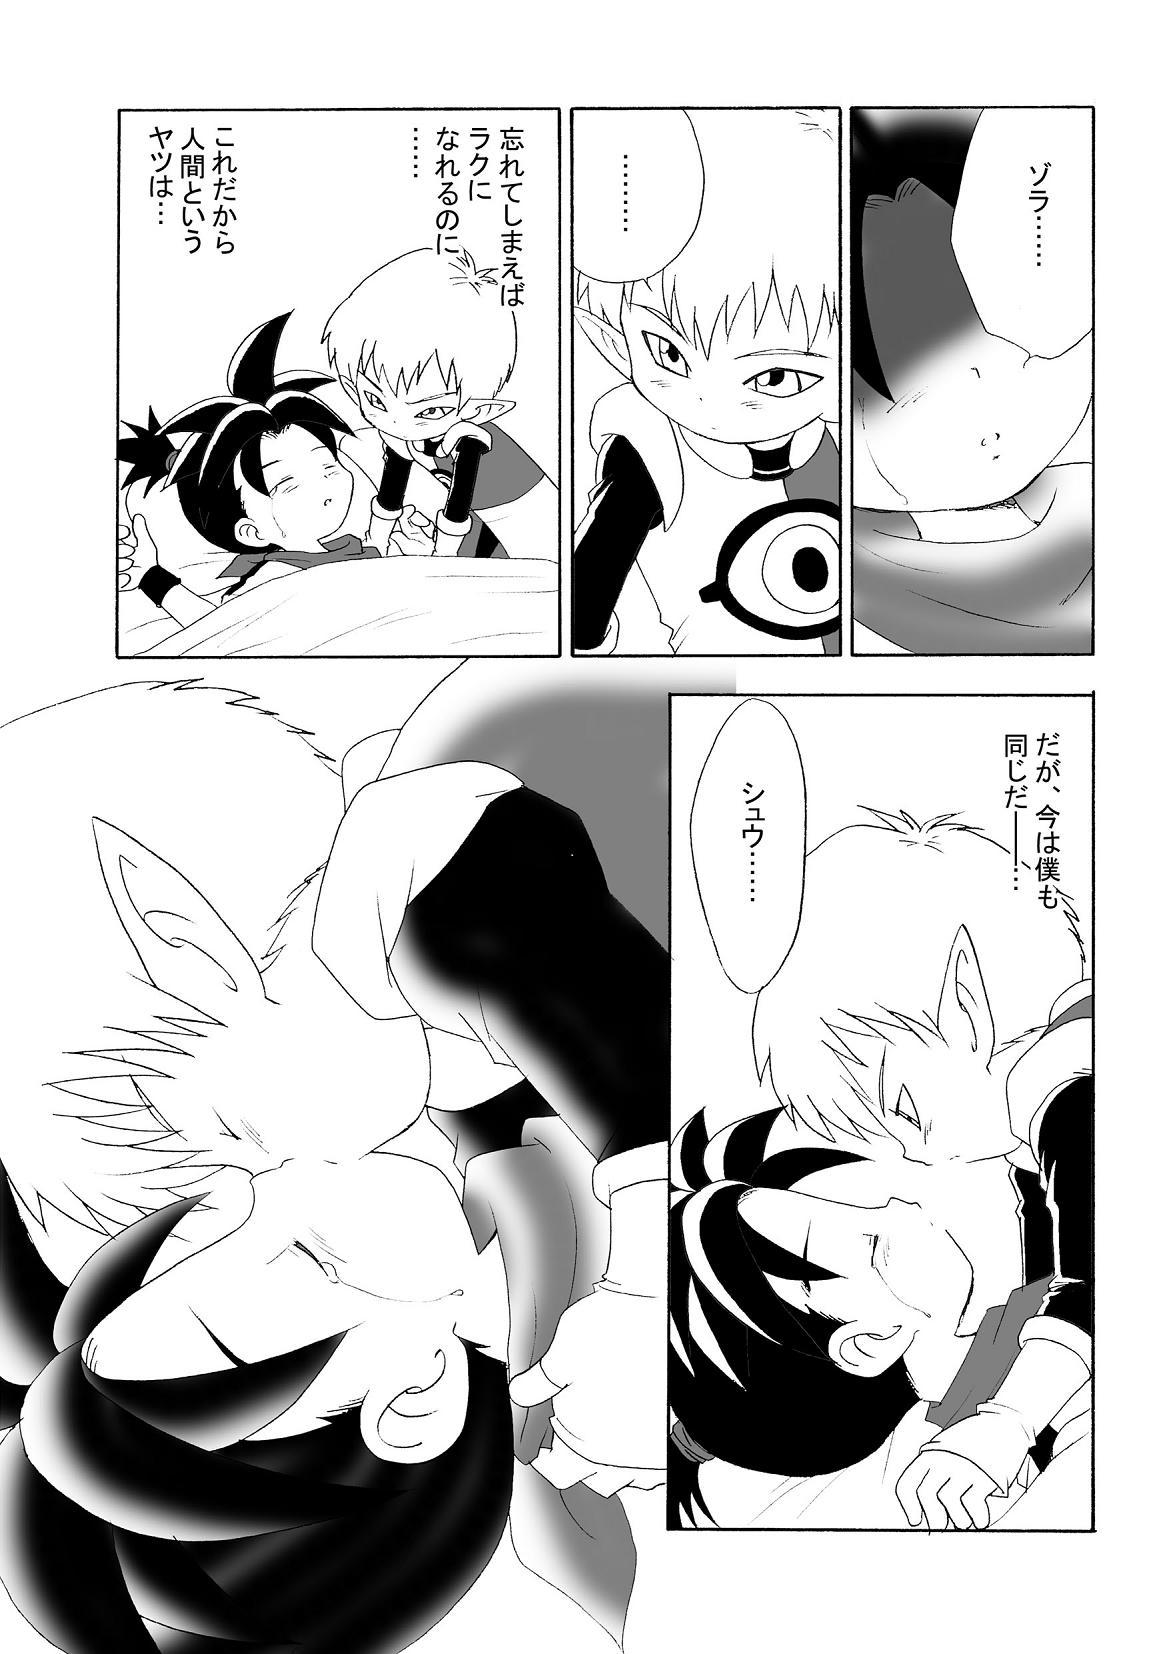 Submissive LITTLE☆DARLING - Blue dragon Romance - Page 6